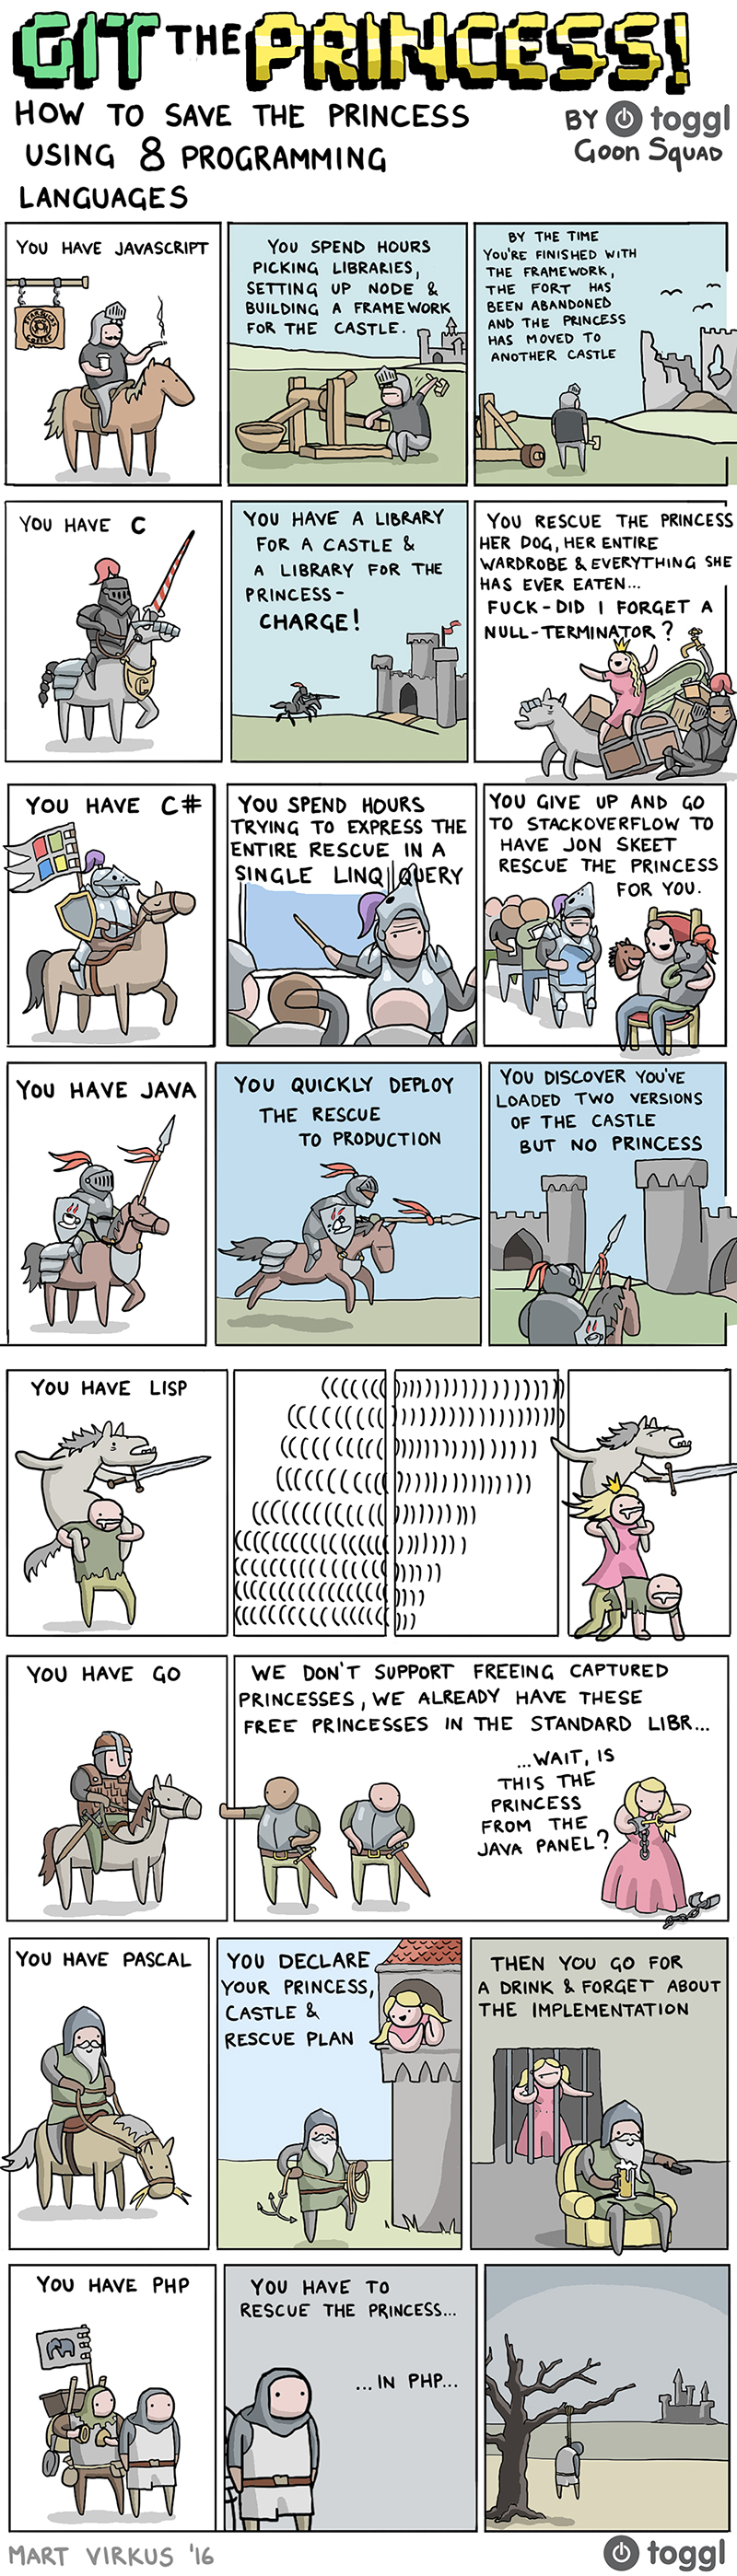 toggl-how-to-save-the-princess-in-8-programming-languages.jpg